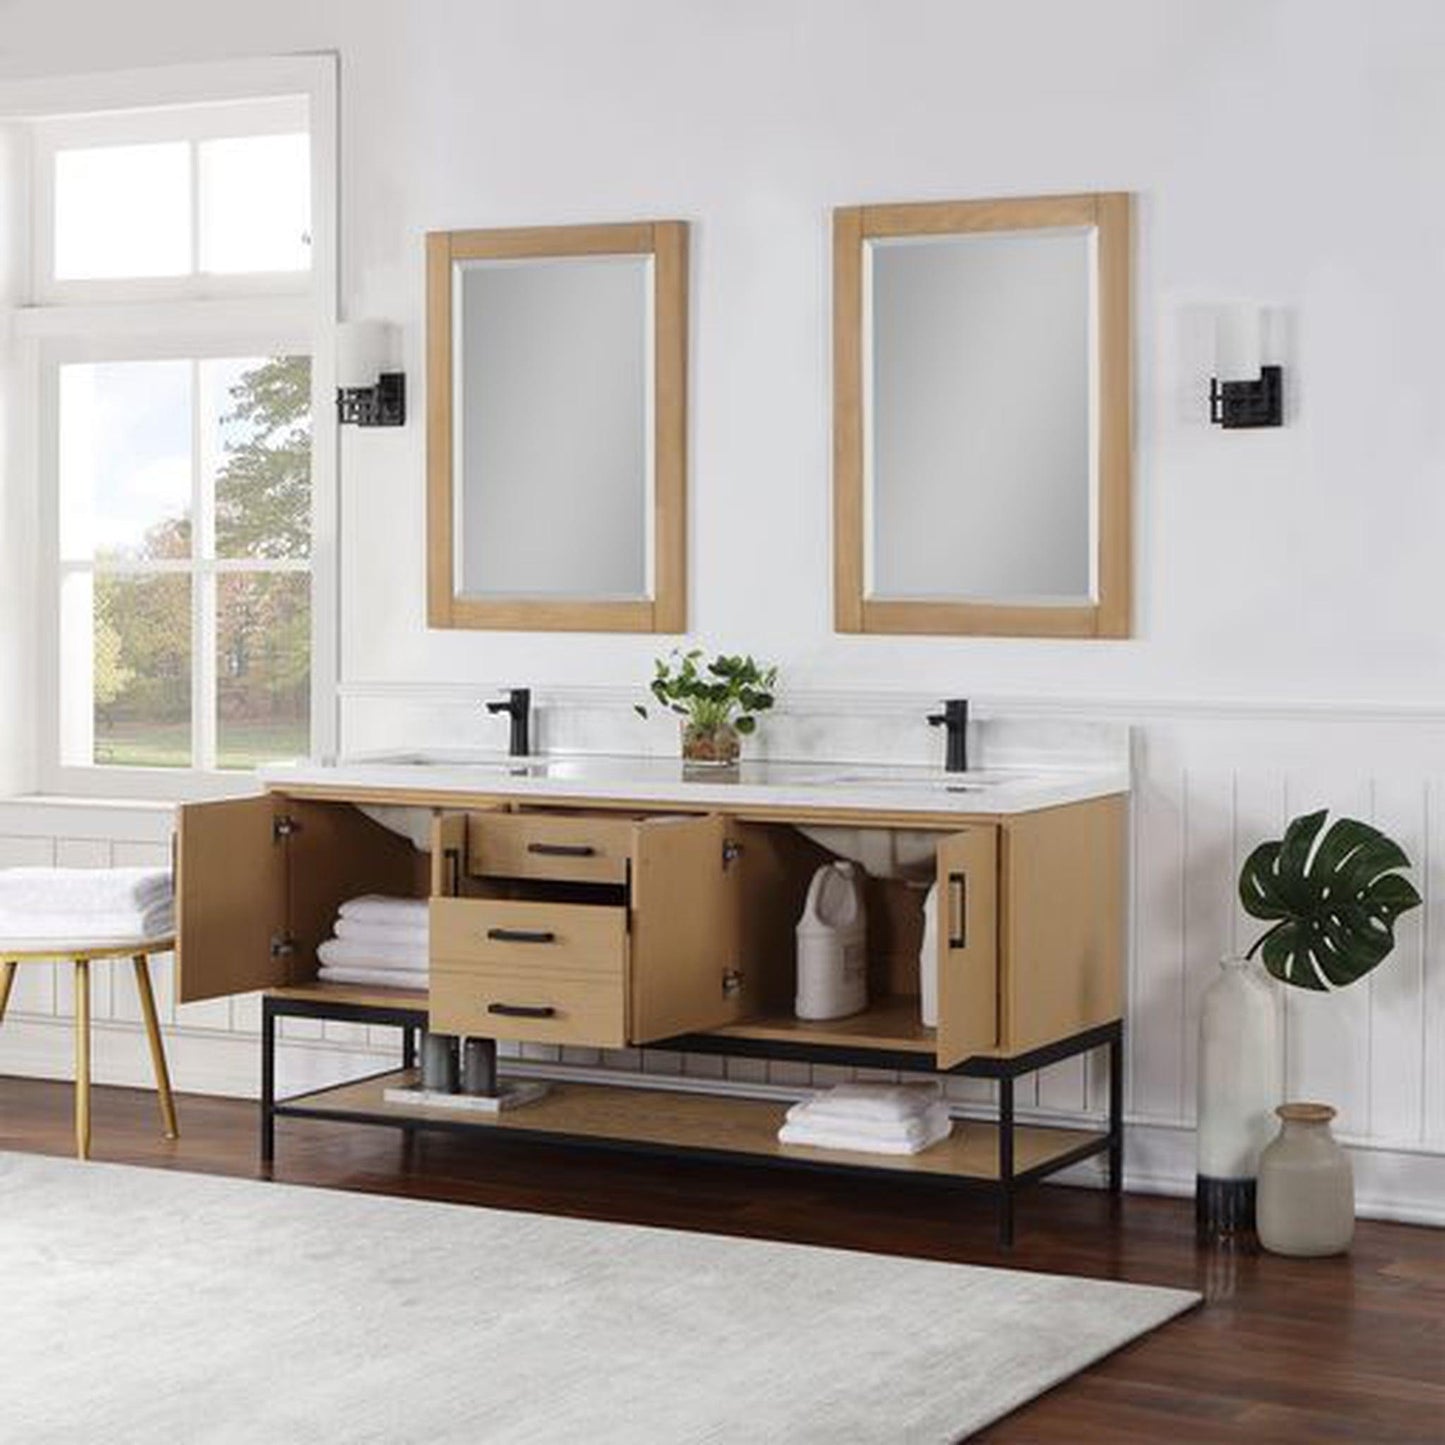 Altair Wildy 72" Washed Oak Freestanding Double Bathroom Vanity Set With Mirror, Stylish Composite Grain White Stone Top, Two Rectangular Undermount Ceramic Sinks, Overflow, and Backsplash